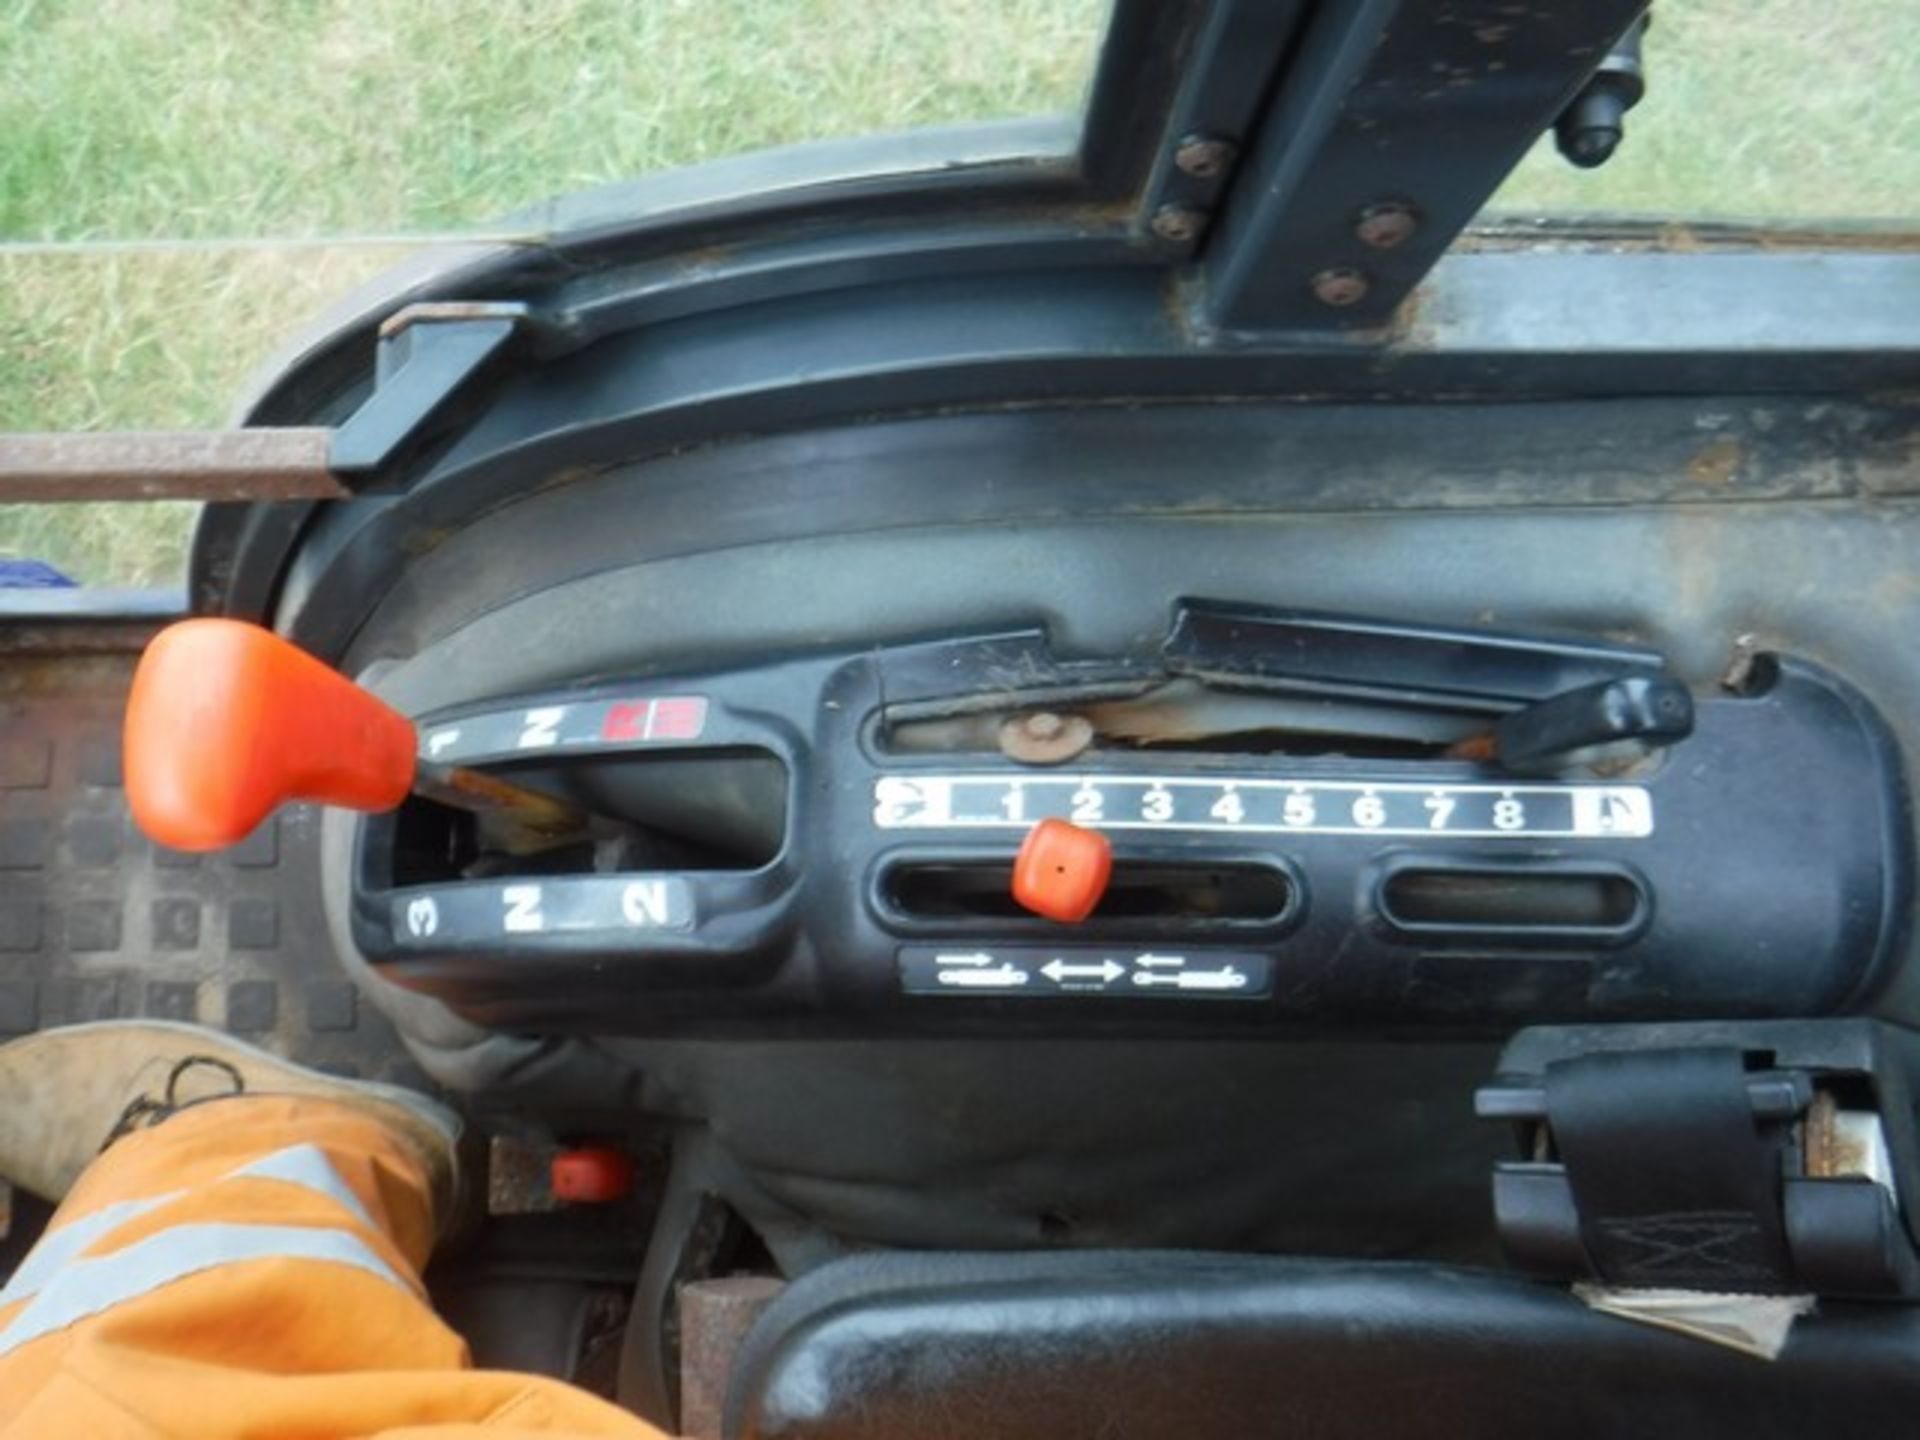 2006 KUBOTA B2400, S/N D31793, REG - SP56DHK, 1254HRS (NOT VERIFIED), COMPACT TRACTOR WITH SNOW PLOU - Image 7 of 17